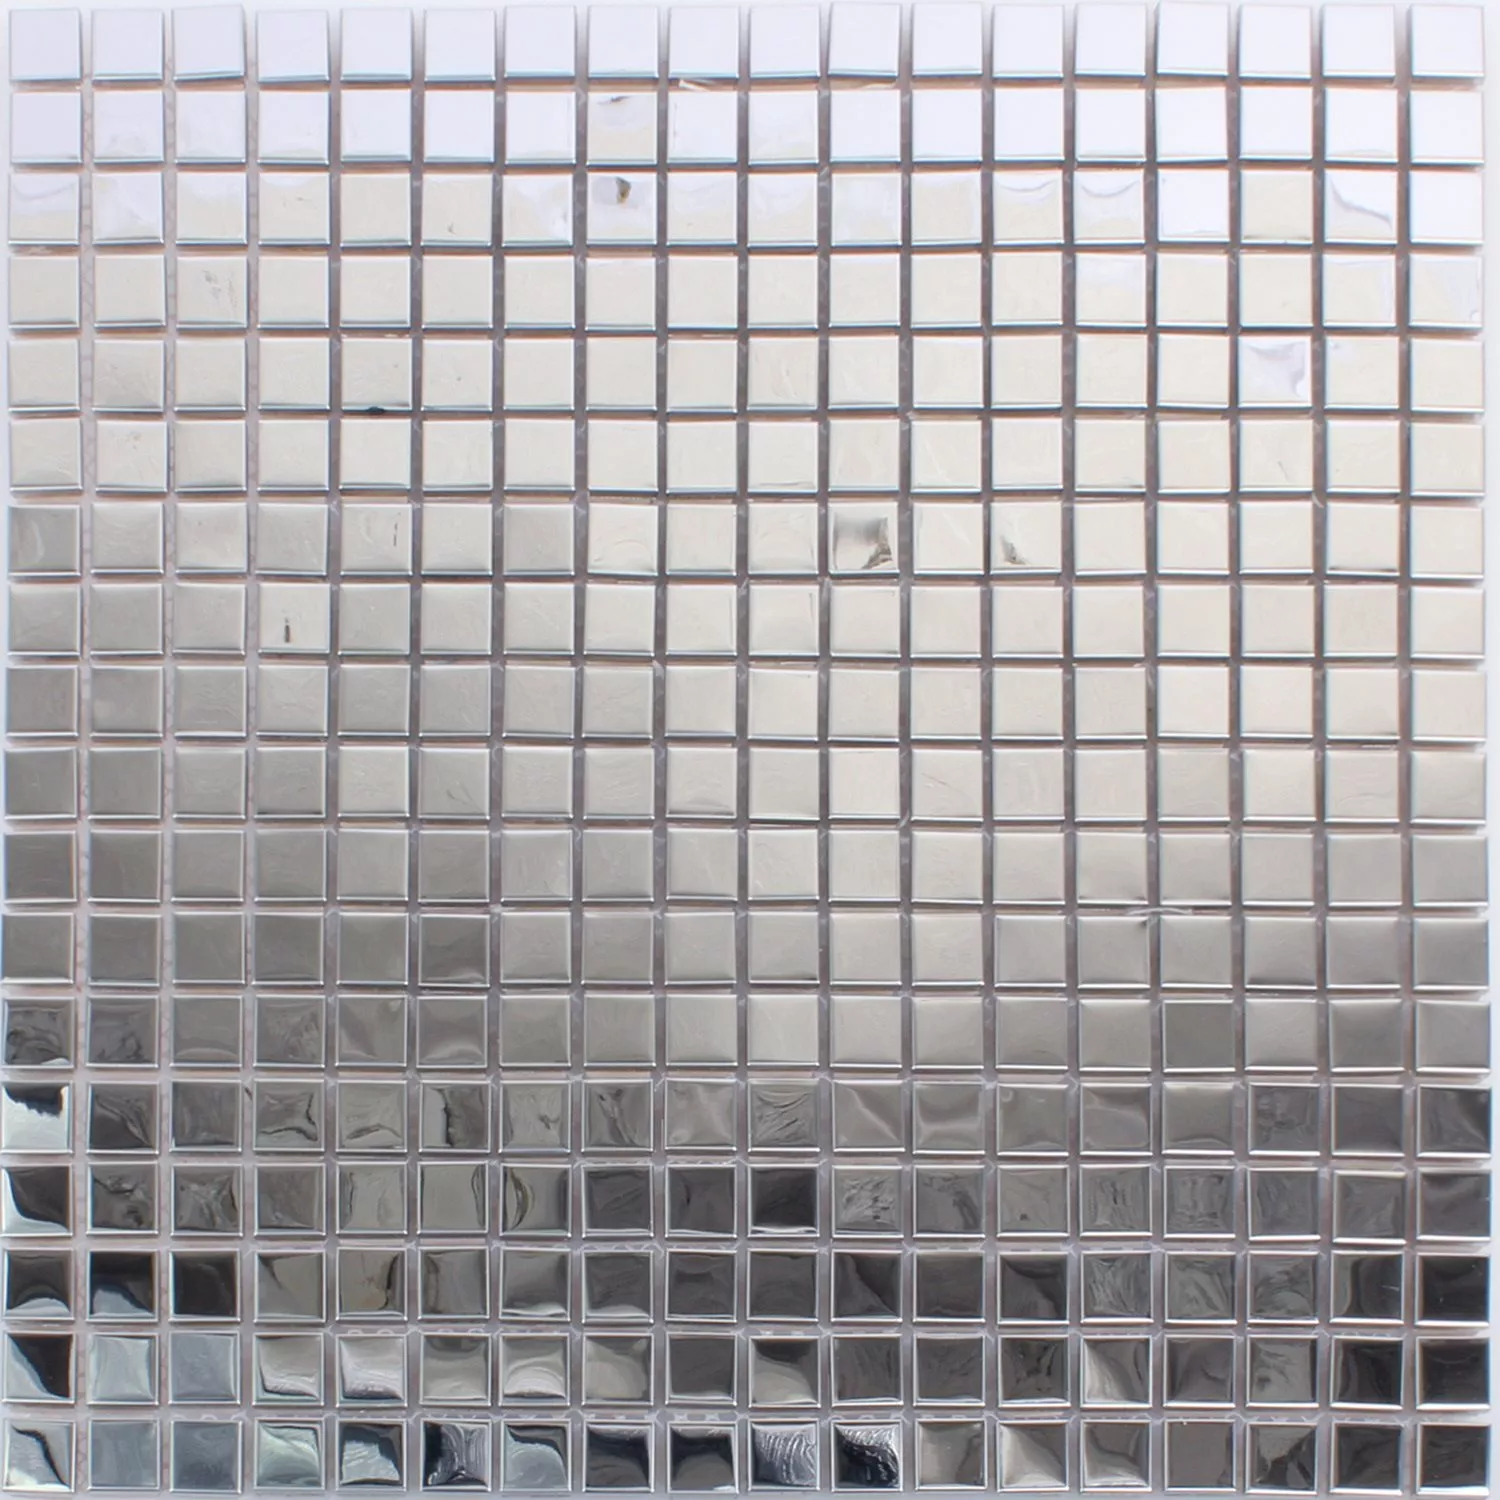 Sample Stainless Steel Mosaic Tiles Glossy Square 15